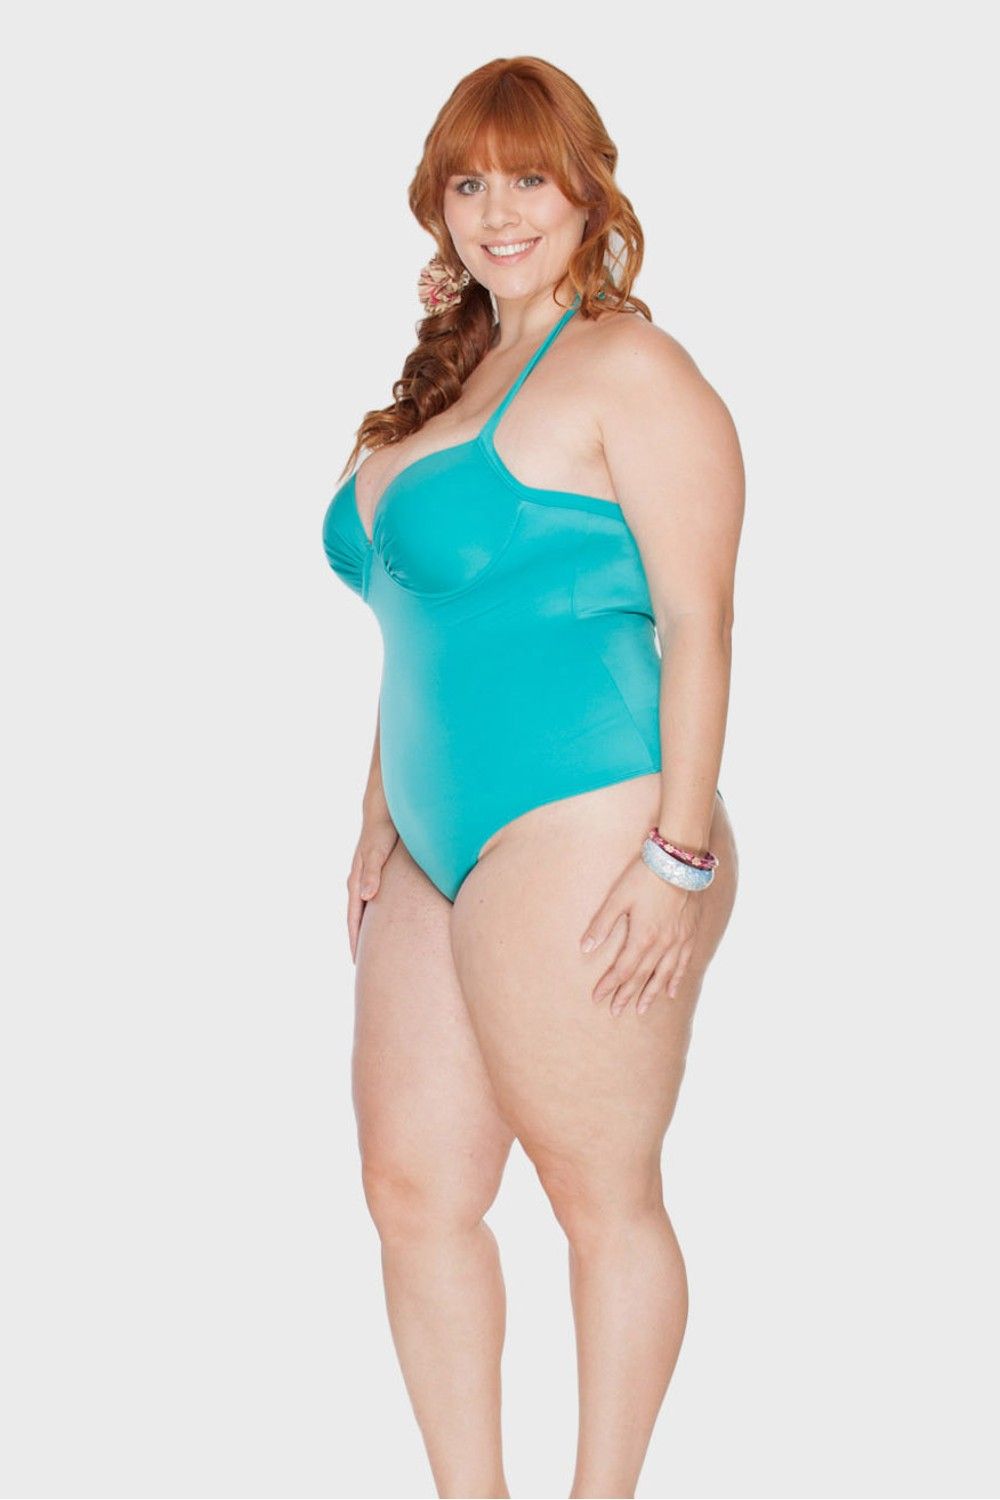 plus size red head